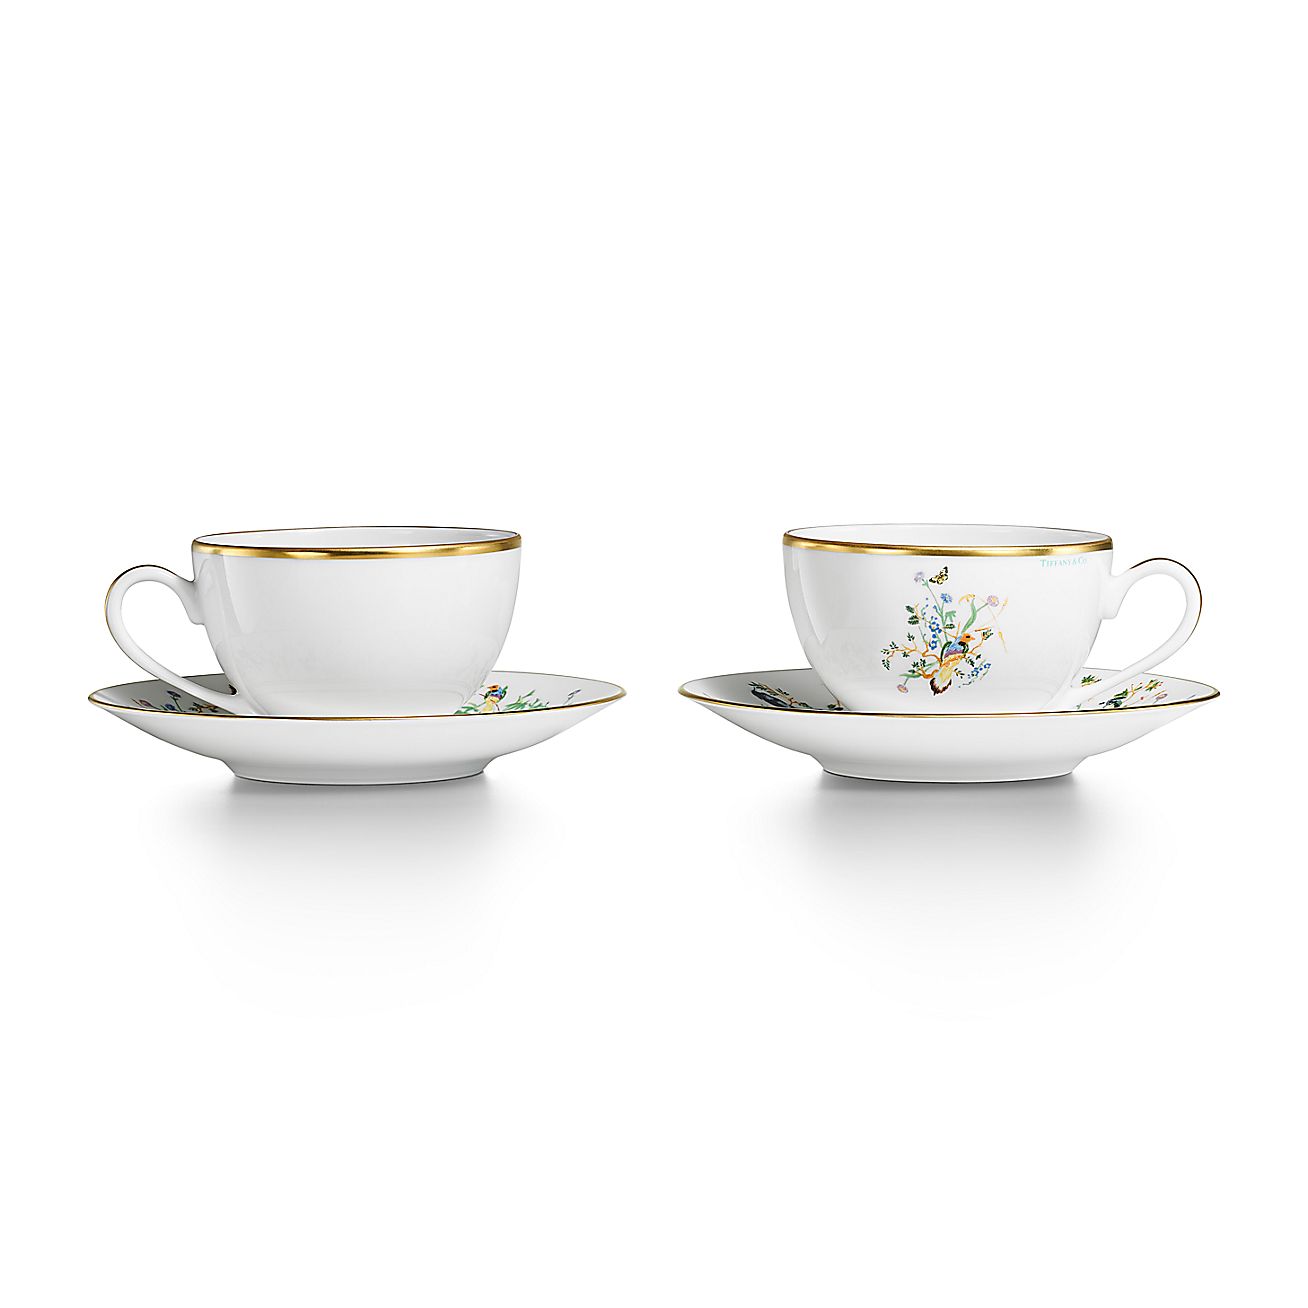 Tiffany Audubon Teacup and Saucer in Porcelain, Set of Two